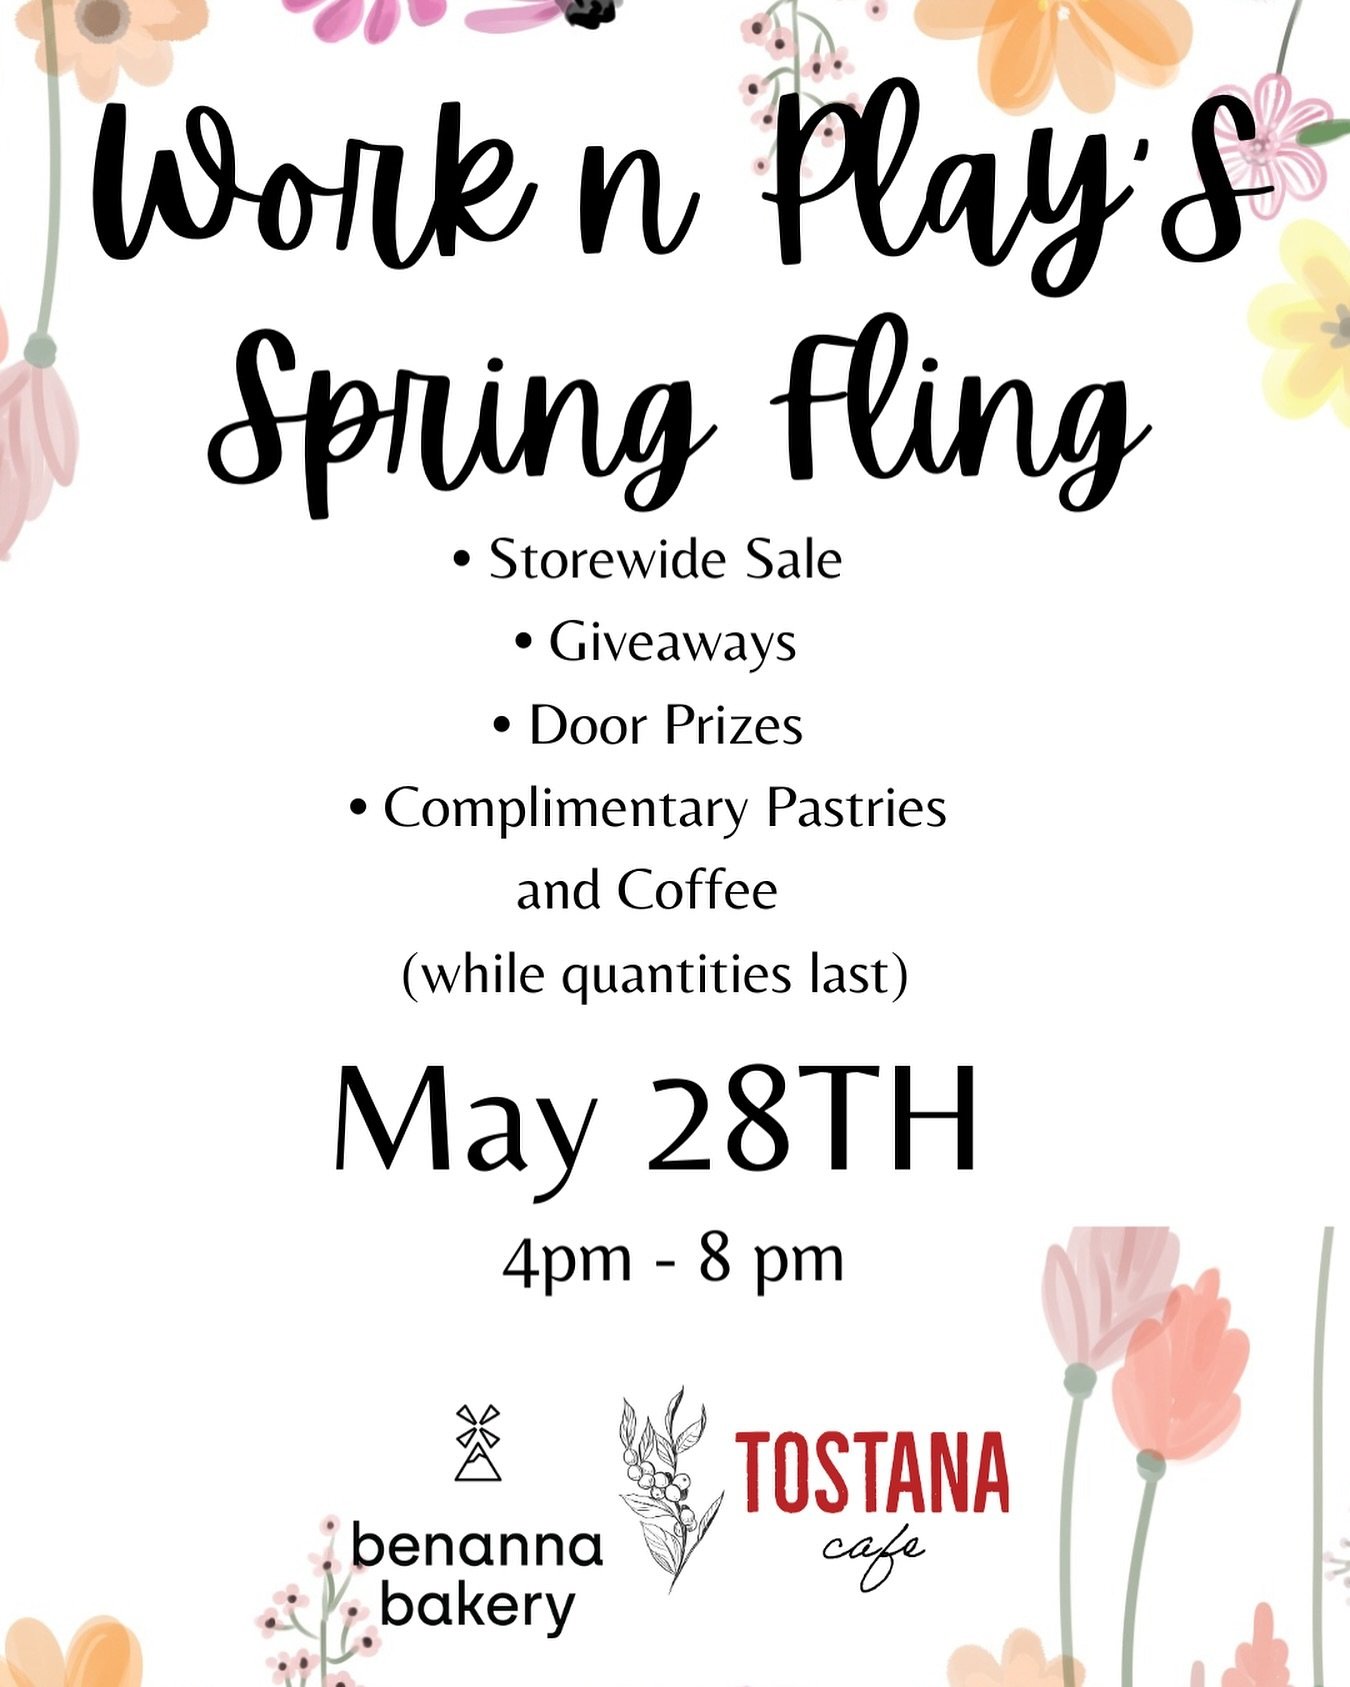 Come join us May 28th for our first ever spring fling! 💐✨☕️

Enjoy complimentary pastries from Benanna Bakery and coffee from Tostana Coffee truck while shopping some great sales! 🎉